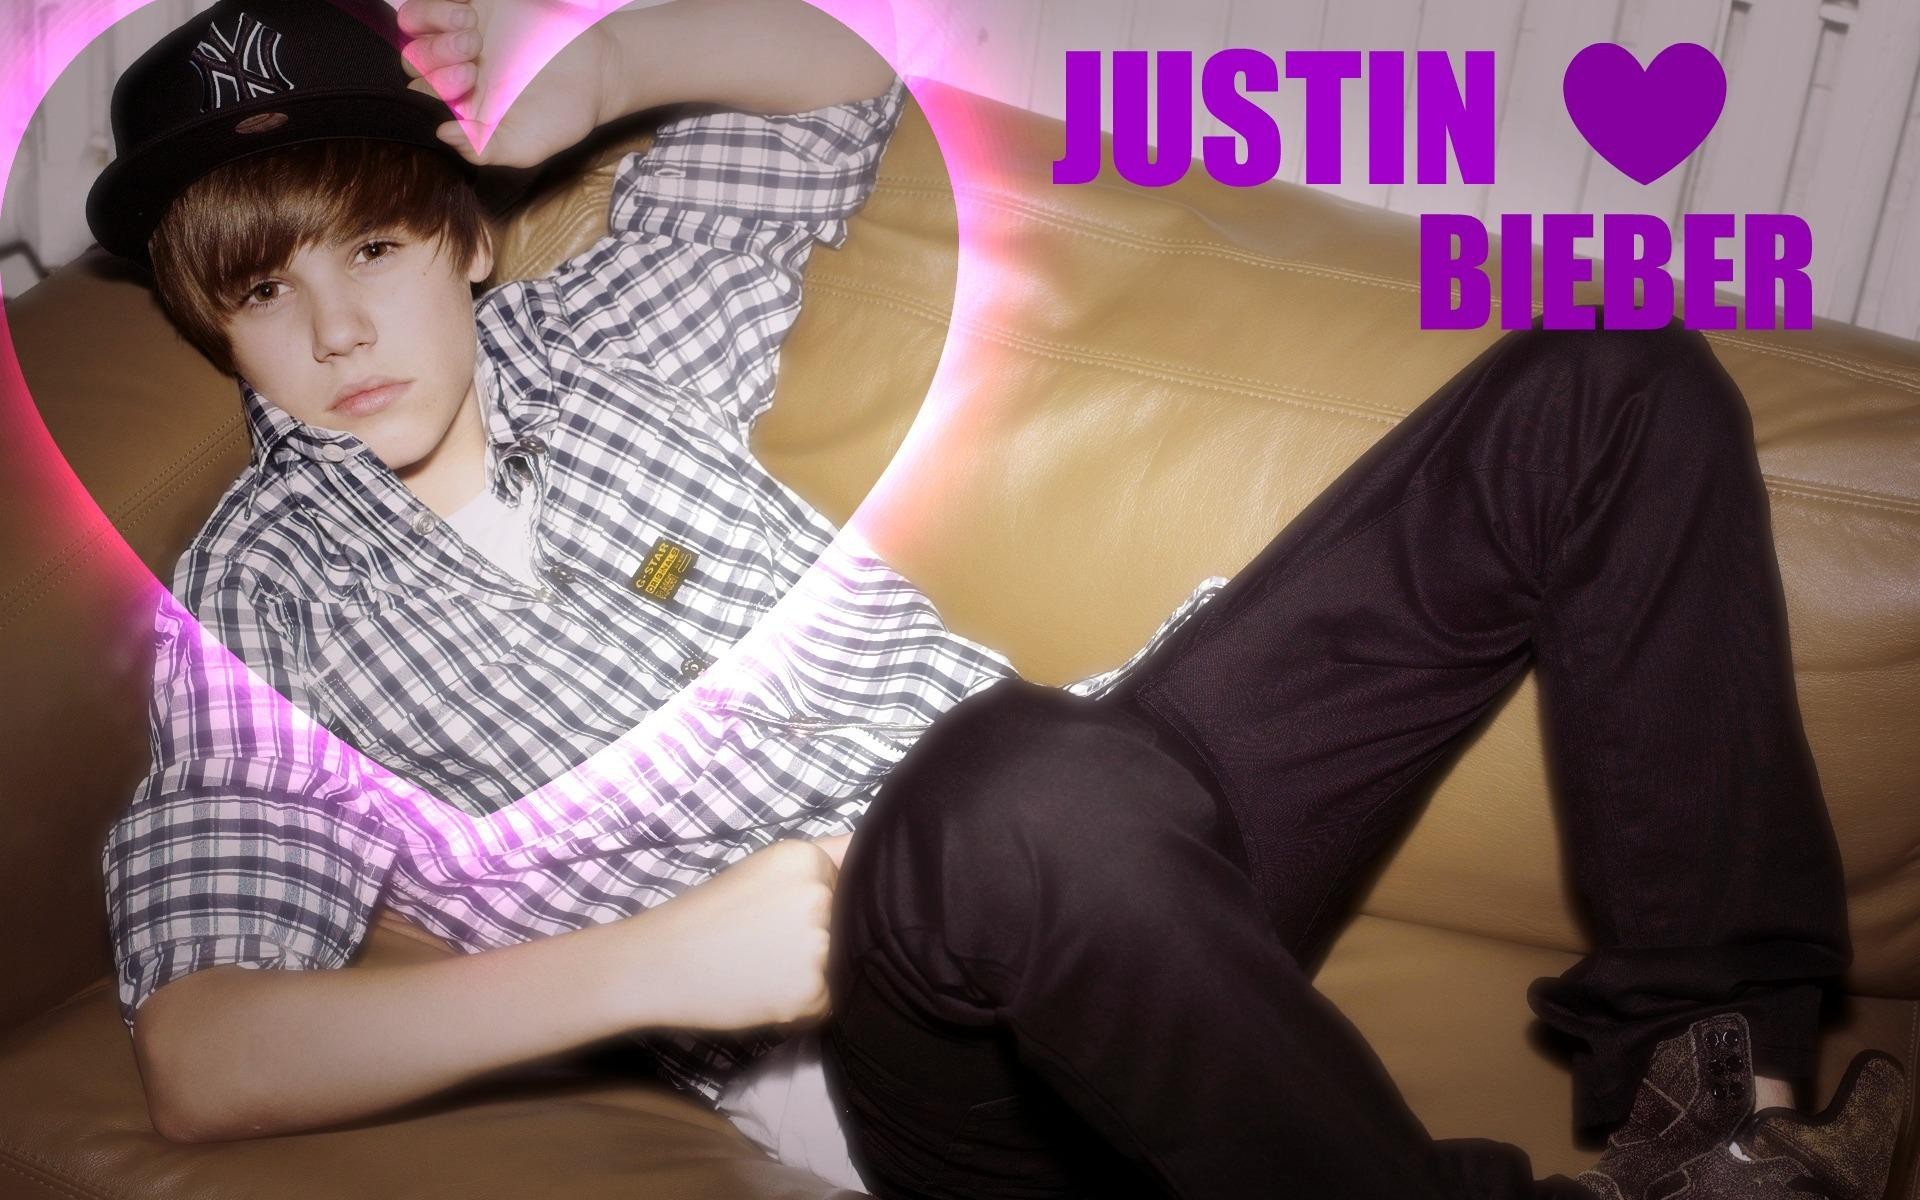  Justin bieber 2013 desktop wallpaper and make this wallpaper for your